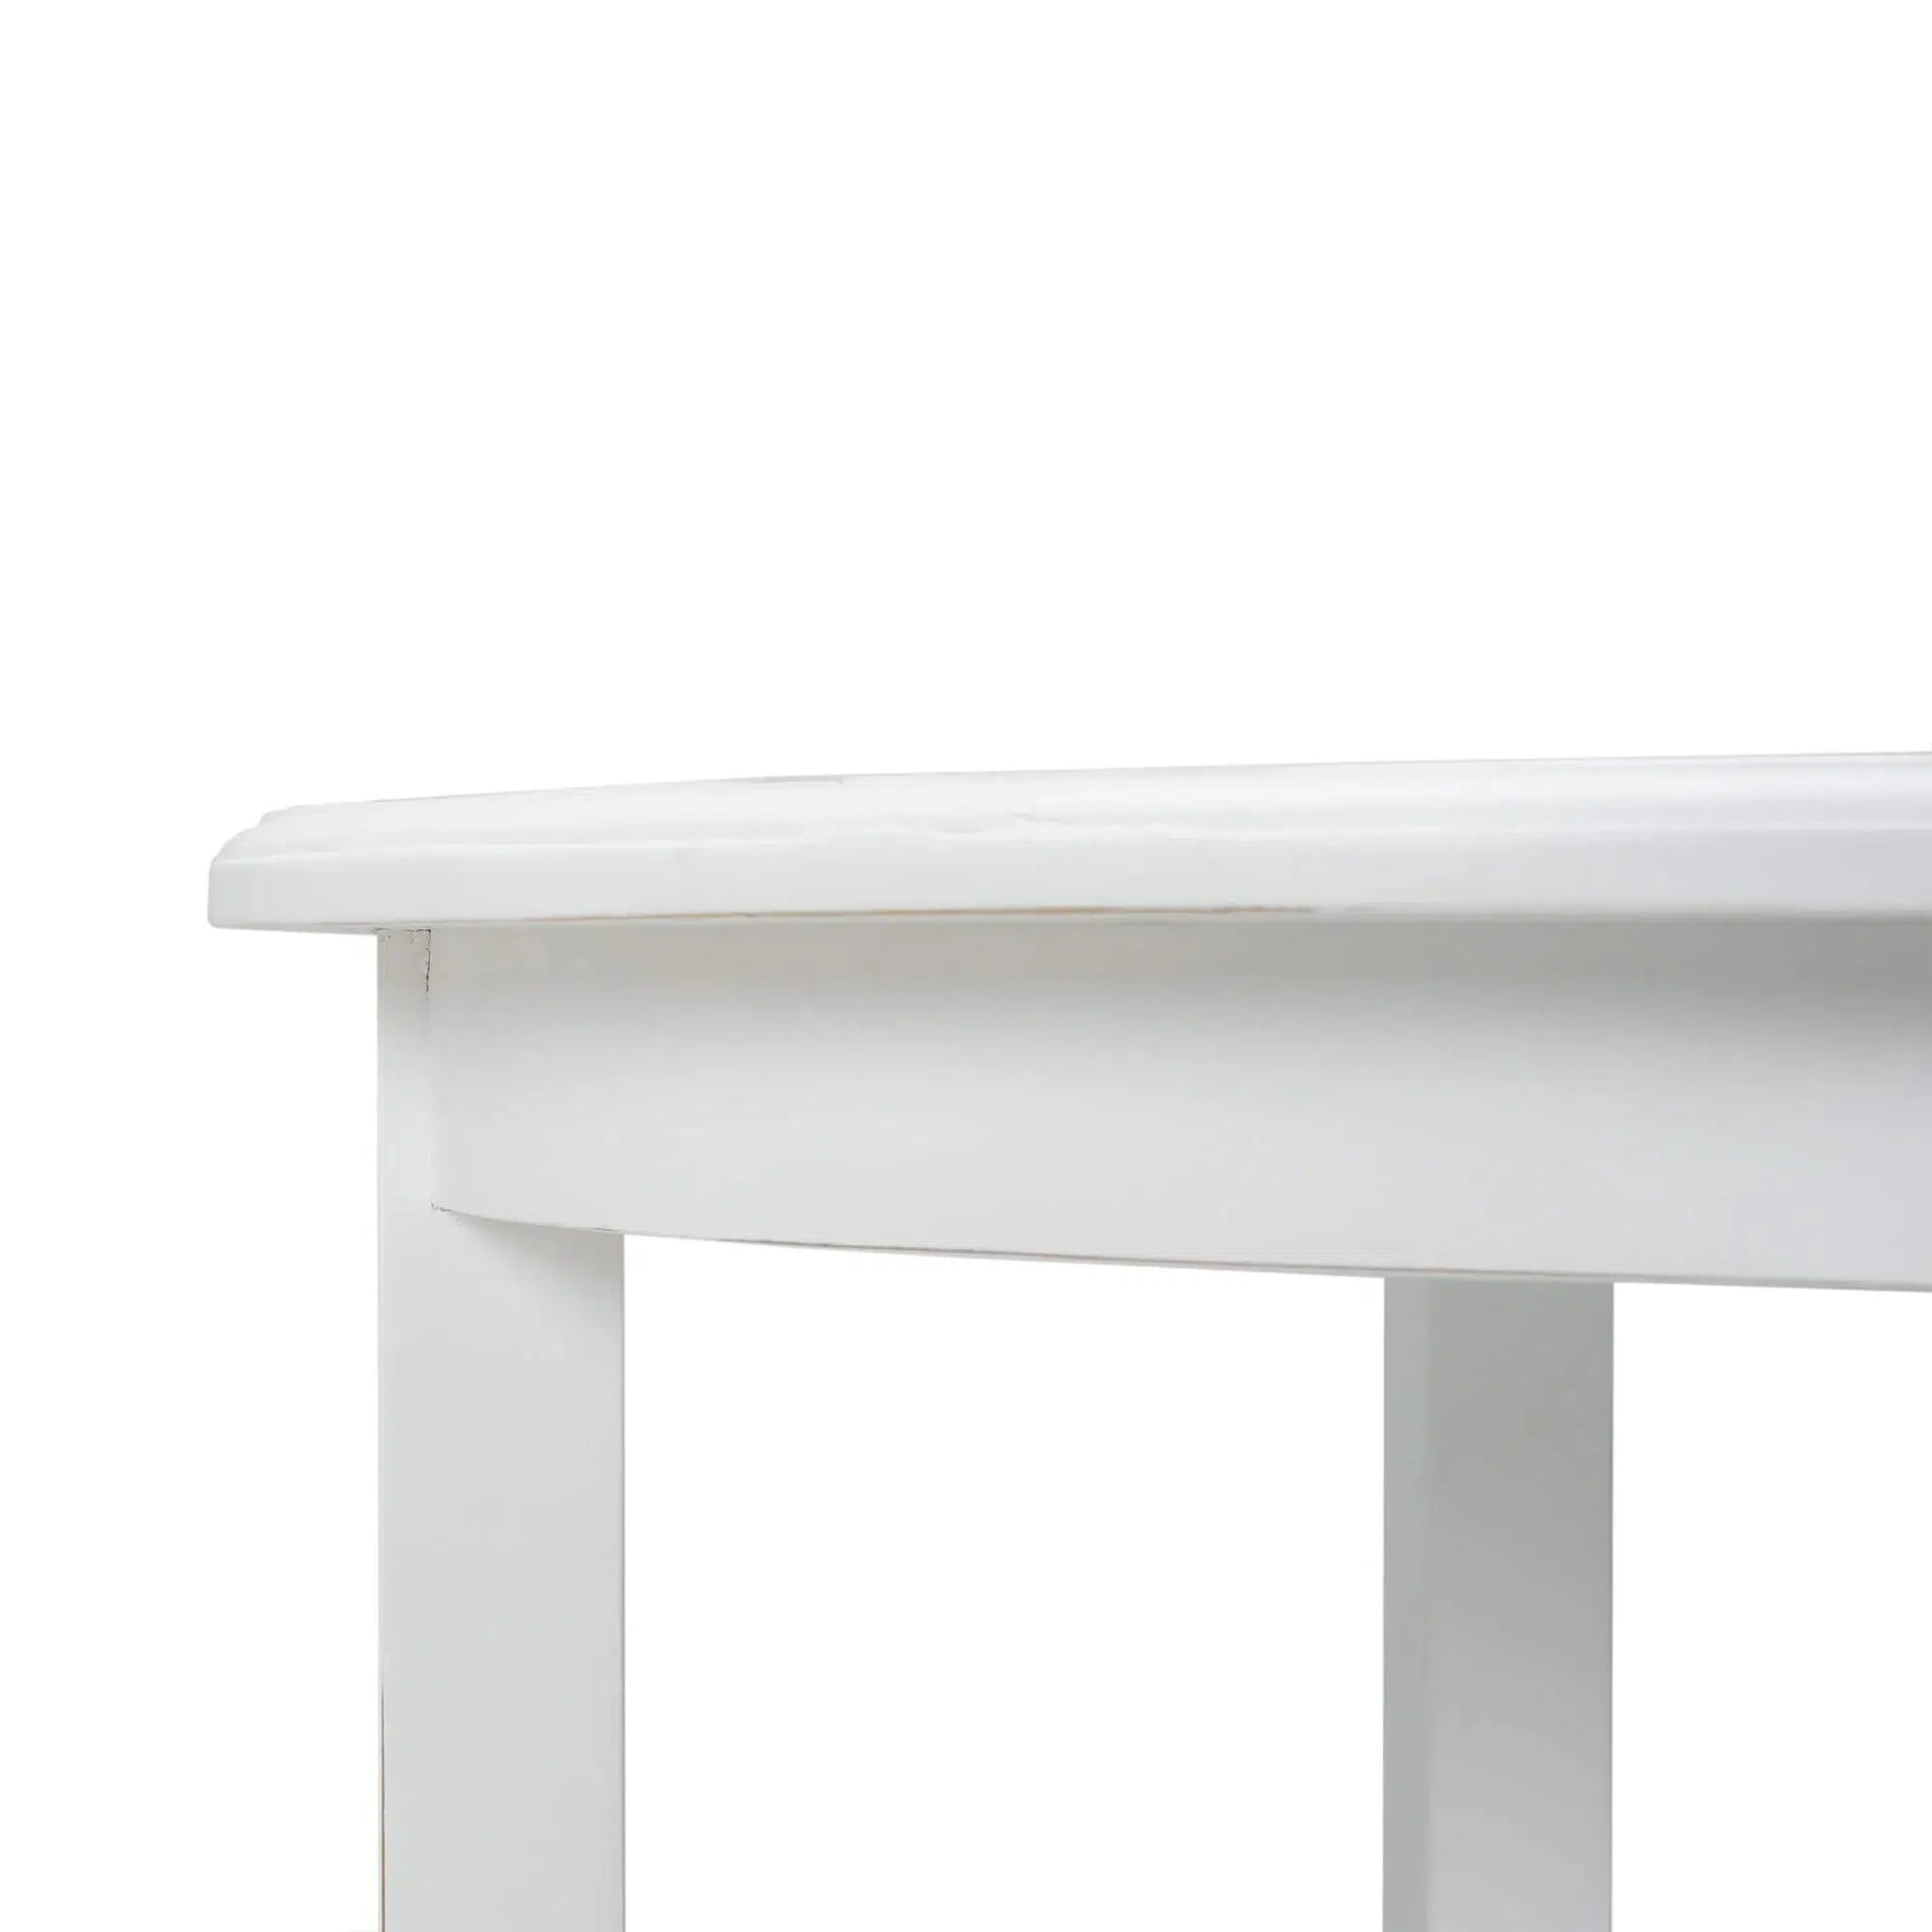 Luna Round 3 Tier Side Table In Architectural White-Blue Hand Home